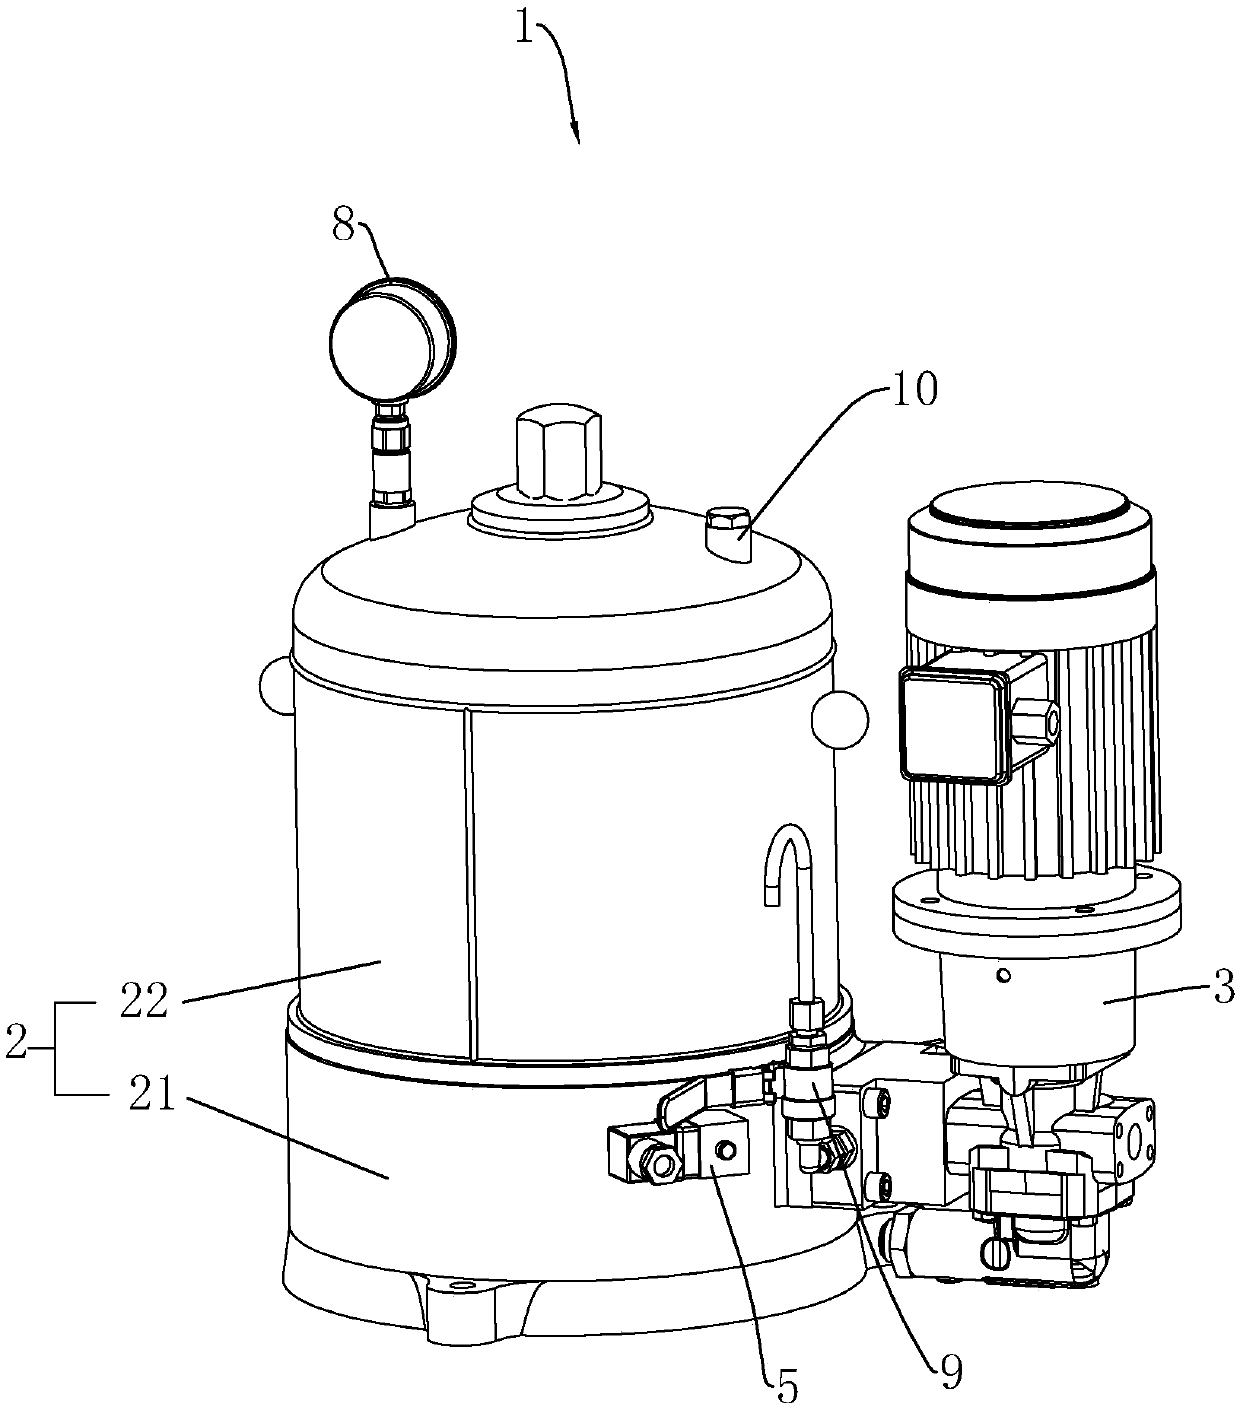 Offline filtration system for high-precision wind power gear box